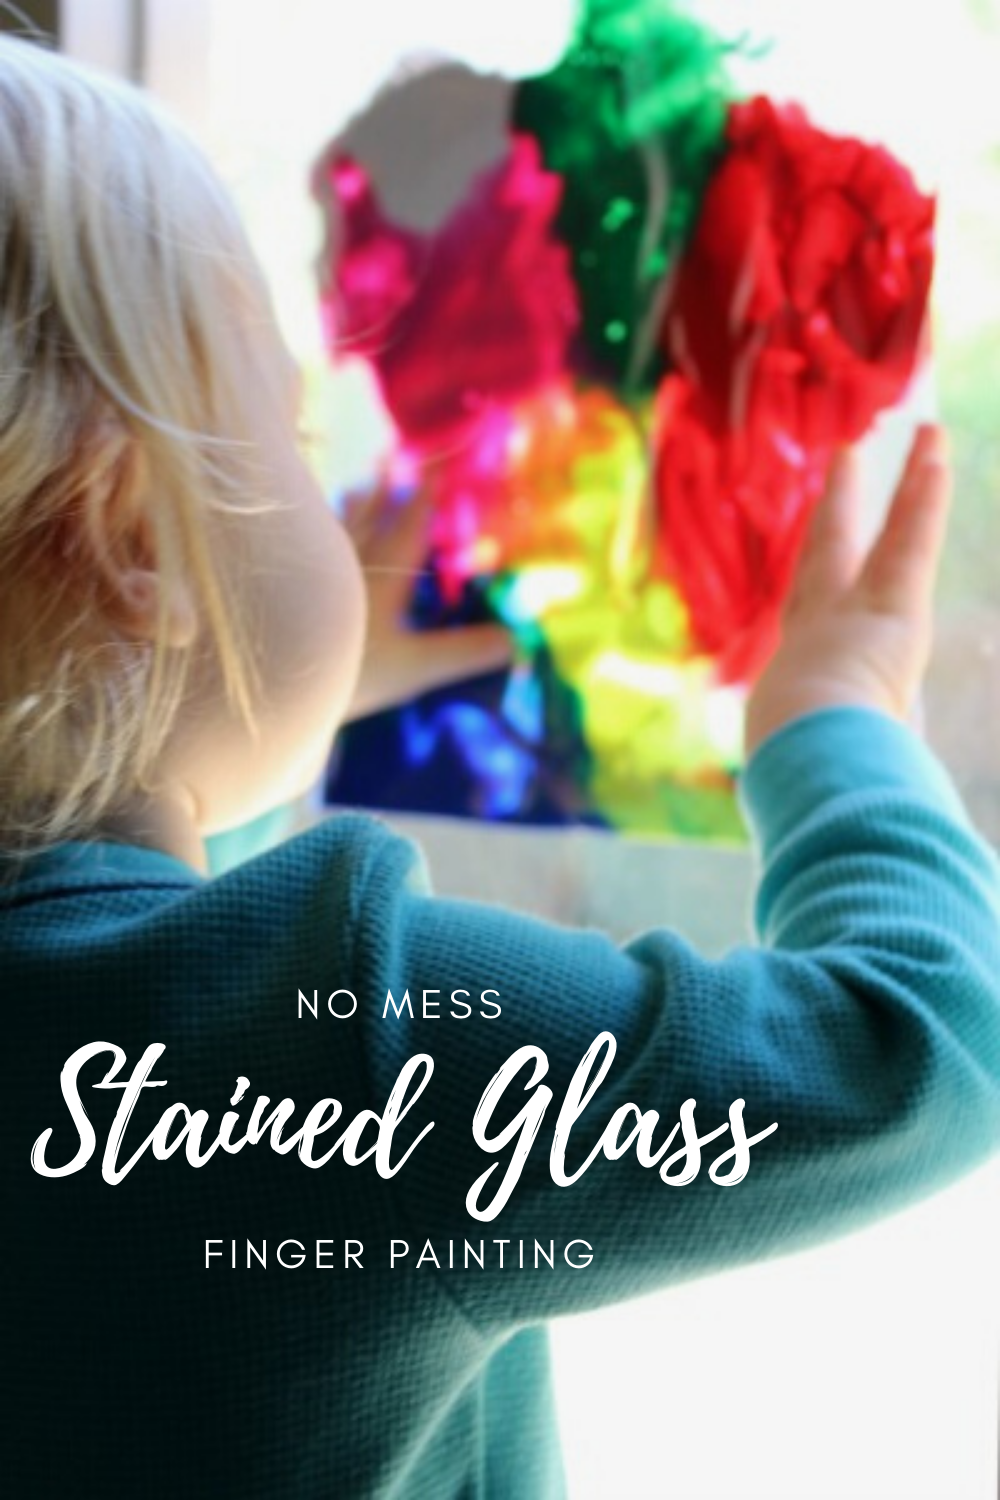 No Mess Stained Glass Finger Painting #diycrafting